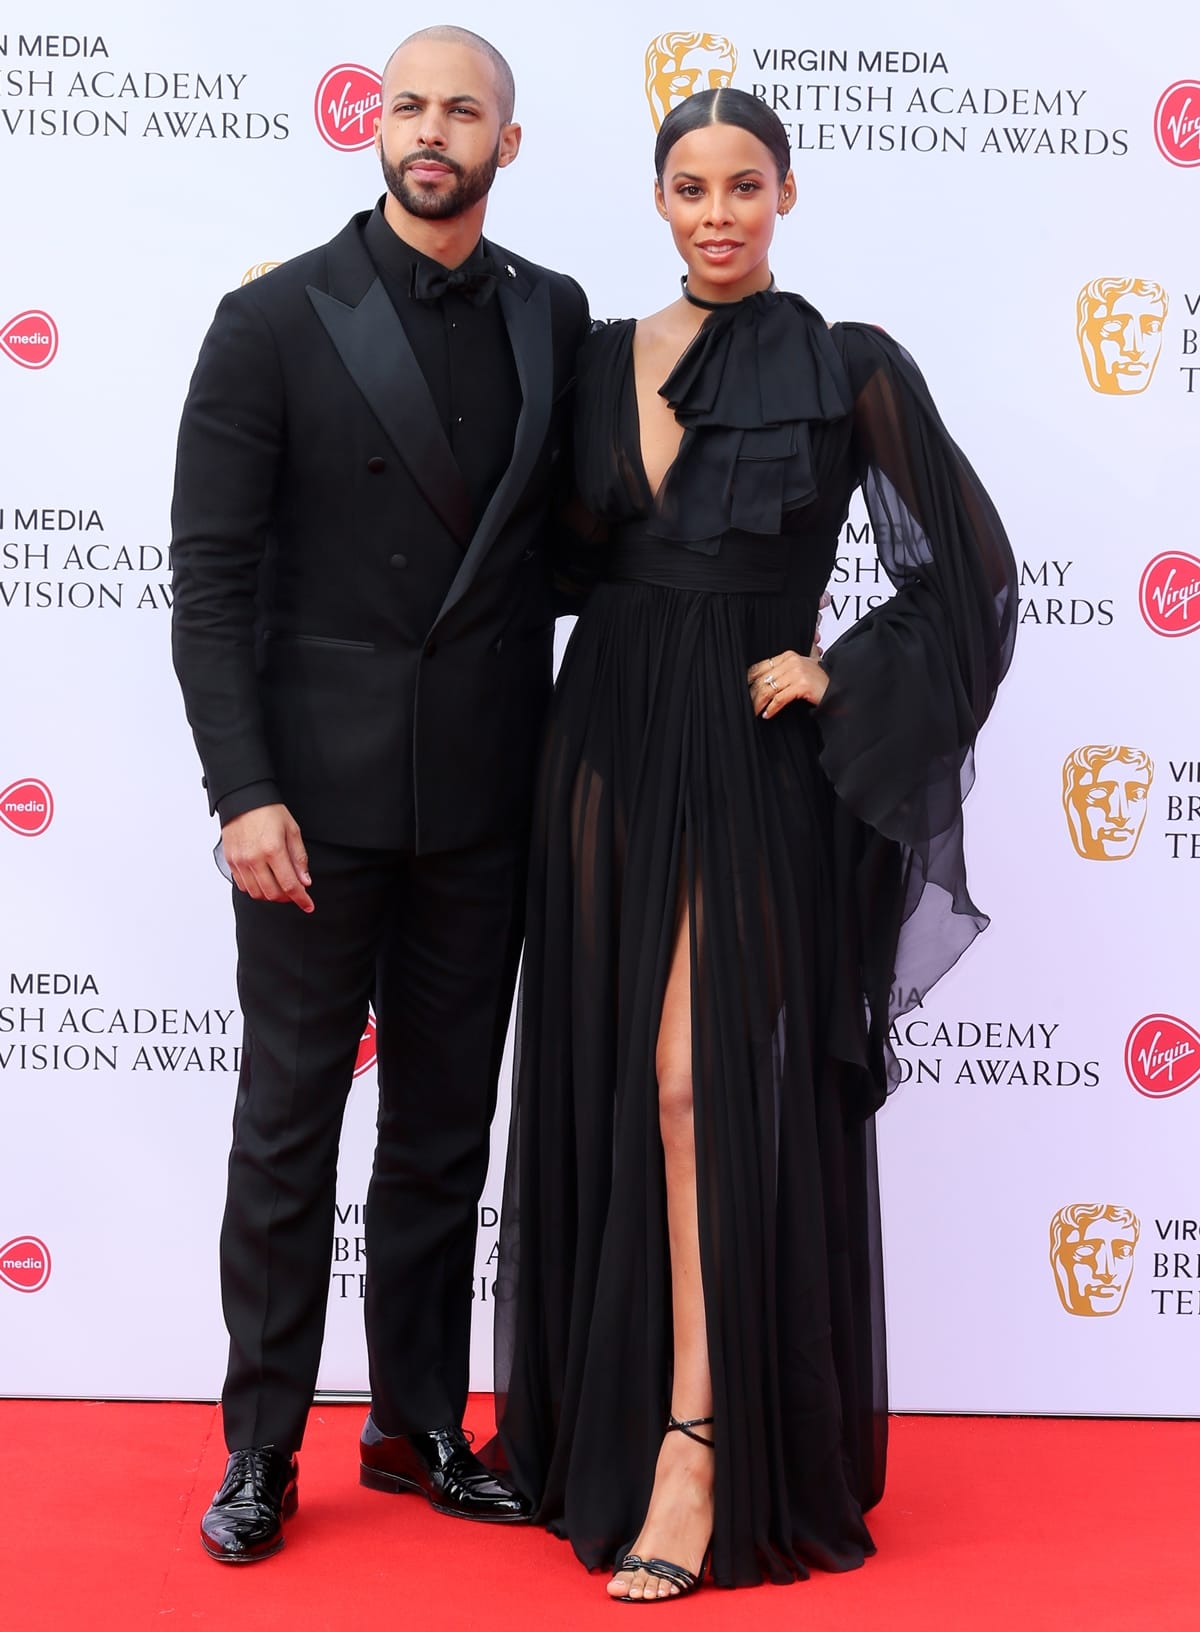 Marvin and Rochelle Humes attend the Virgin Media British Academy Television Awards